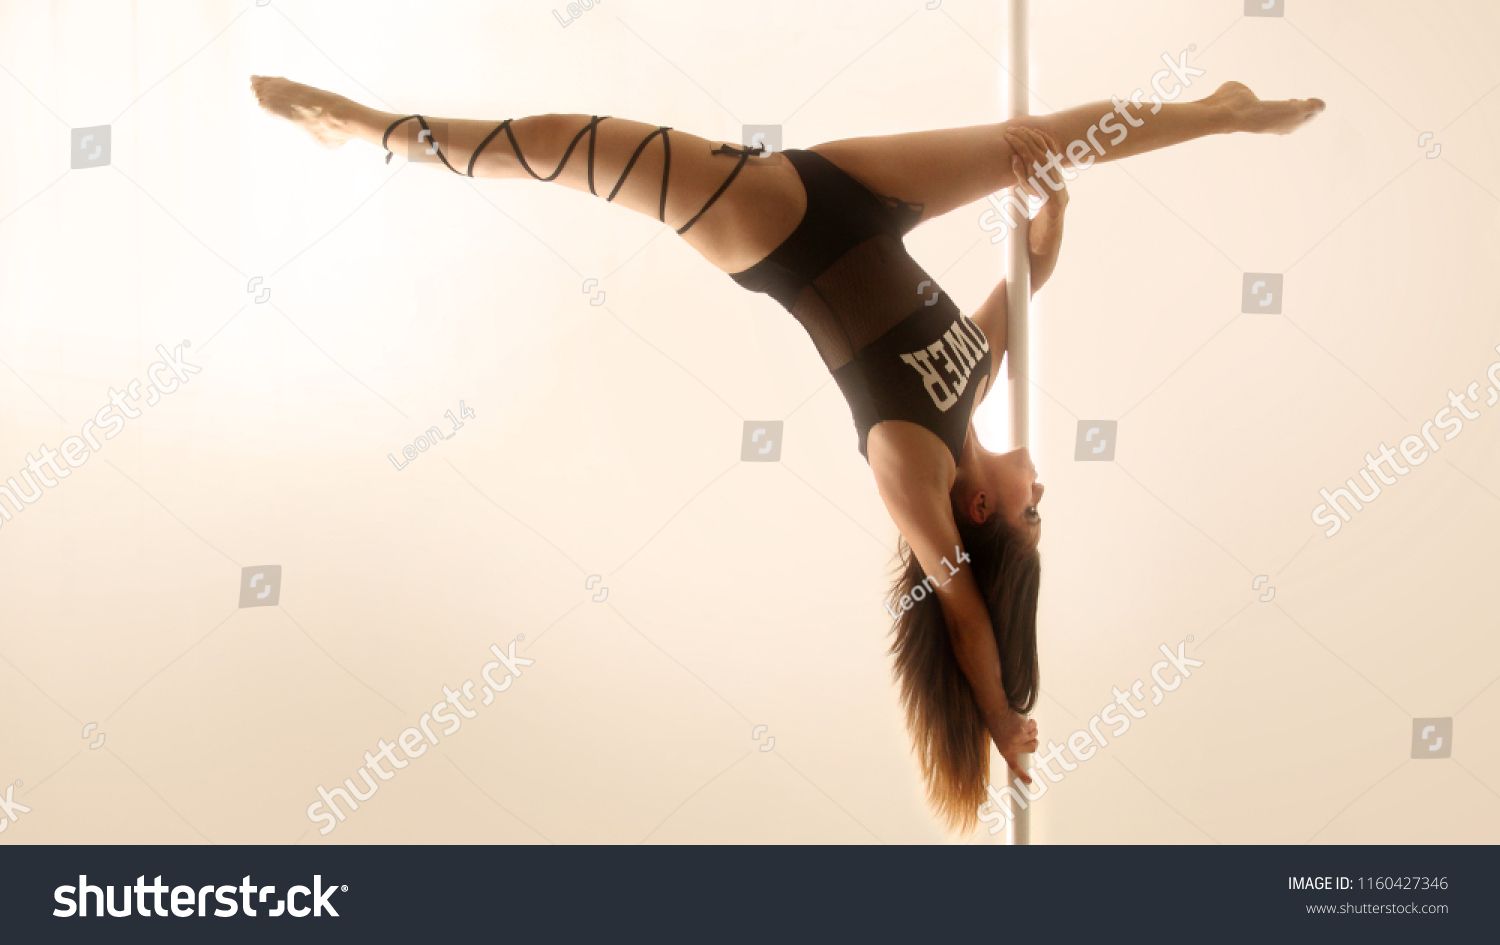 AGUASCALIENTES - MAR 3, 2018: Pole dancer making a complex pose as part of her morning training #1160427346